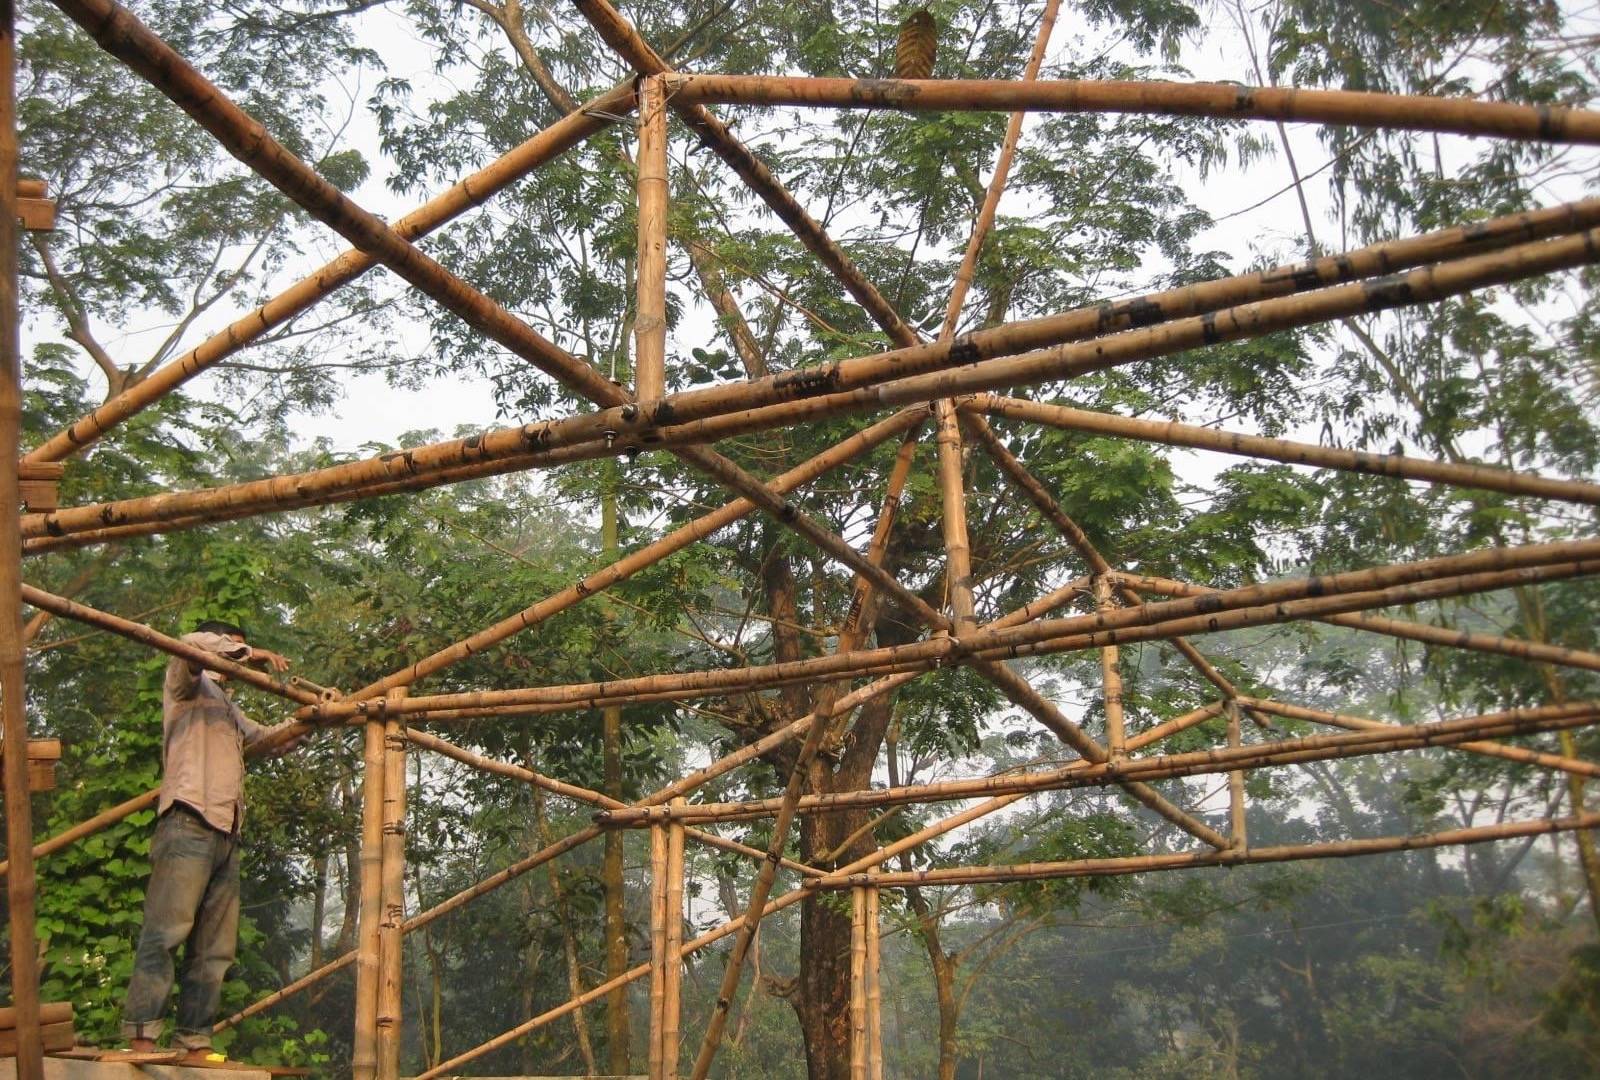 Image: Mannan Foundation Trust & Our Building Design, Photo of a bamboo building workshop with the Rajapur community